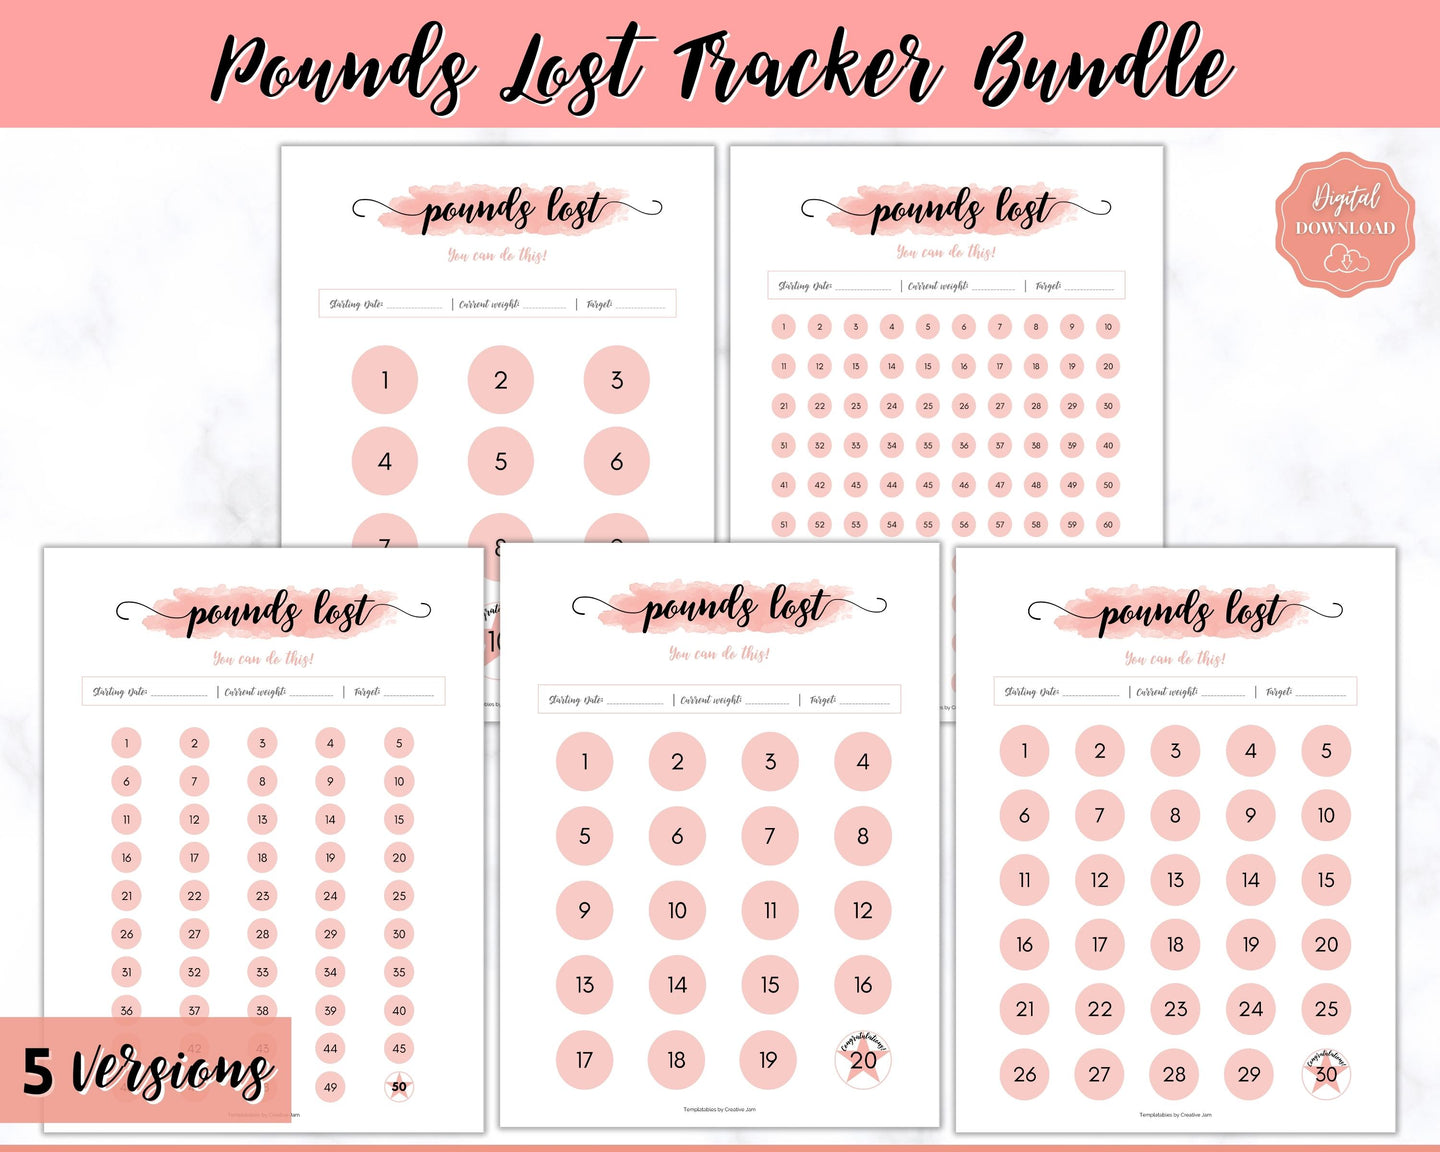 Pounds Lost Tracker Bundle - 10 20, 30, 50, 100 lbs Printable Weight Loss Printables | Pink Watercolor